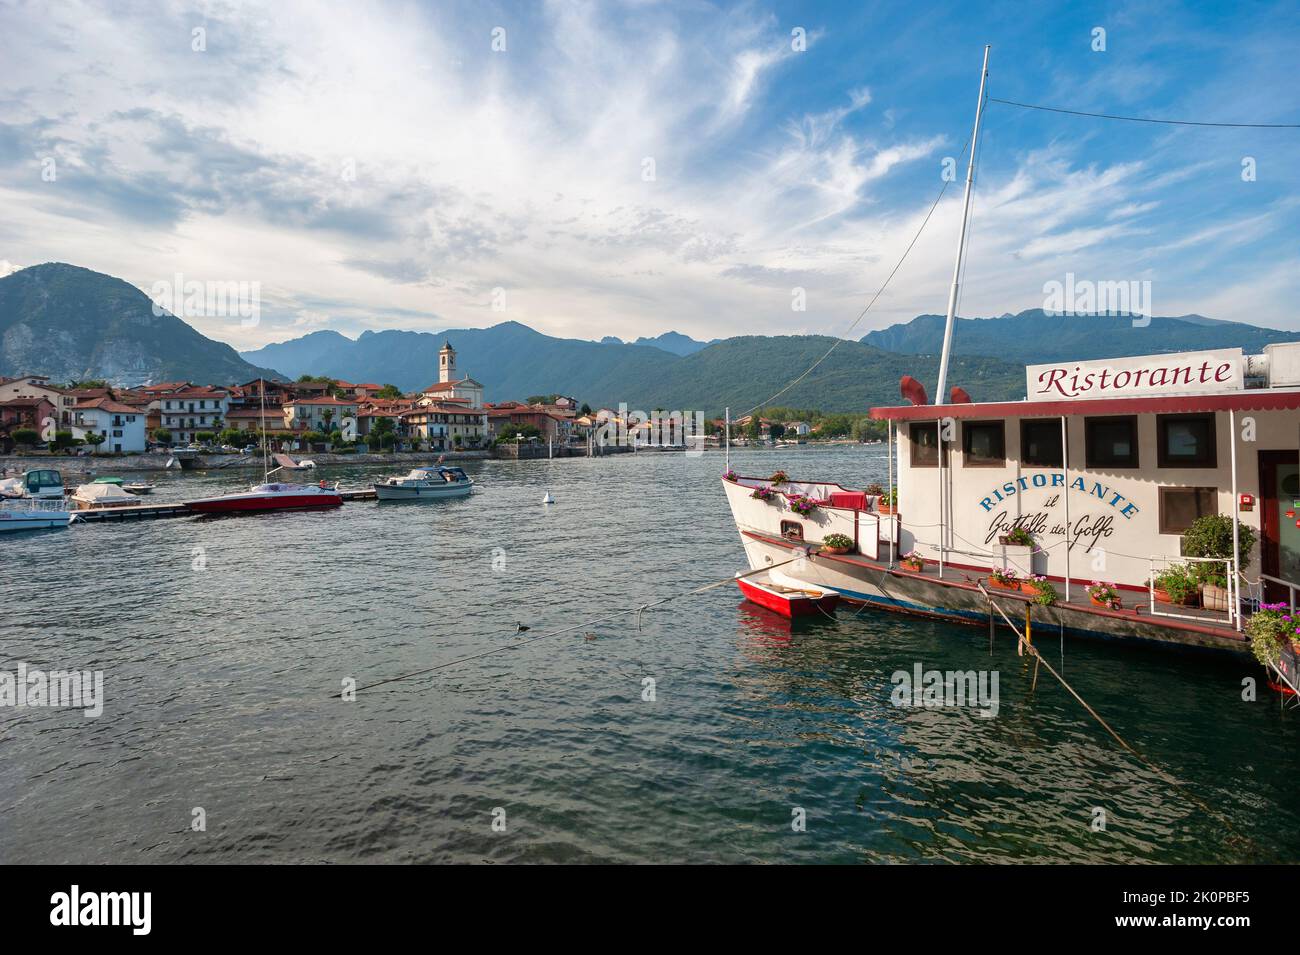 Townscape with ship restaurant on the lake promenade, Feriolo, Piedmont, Italy, Europe Stock Photo